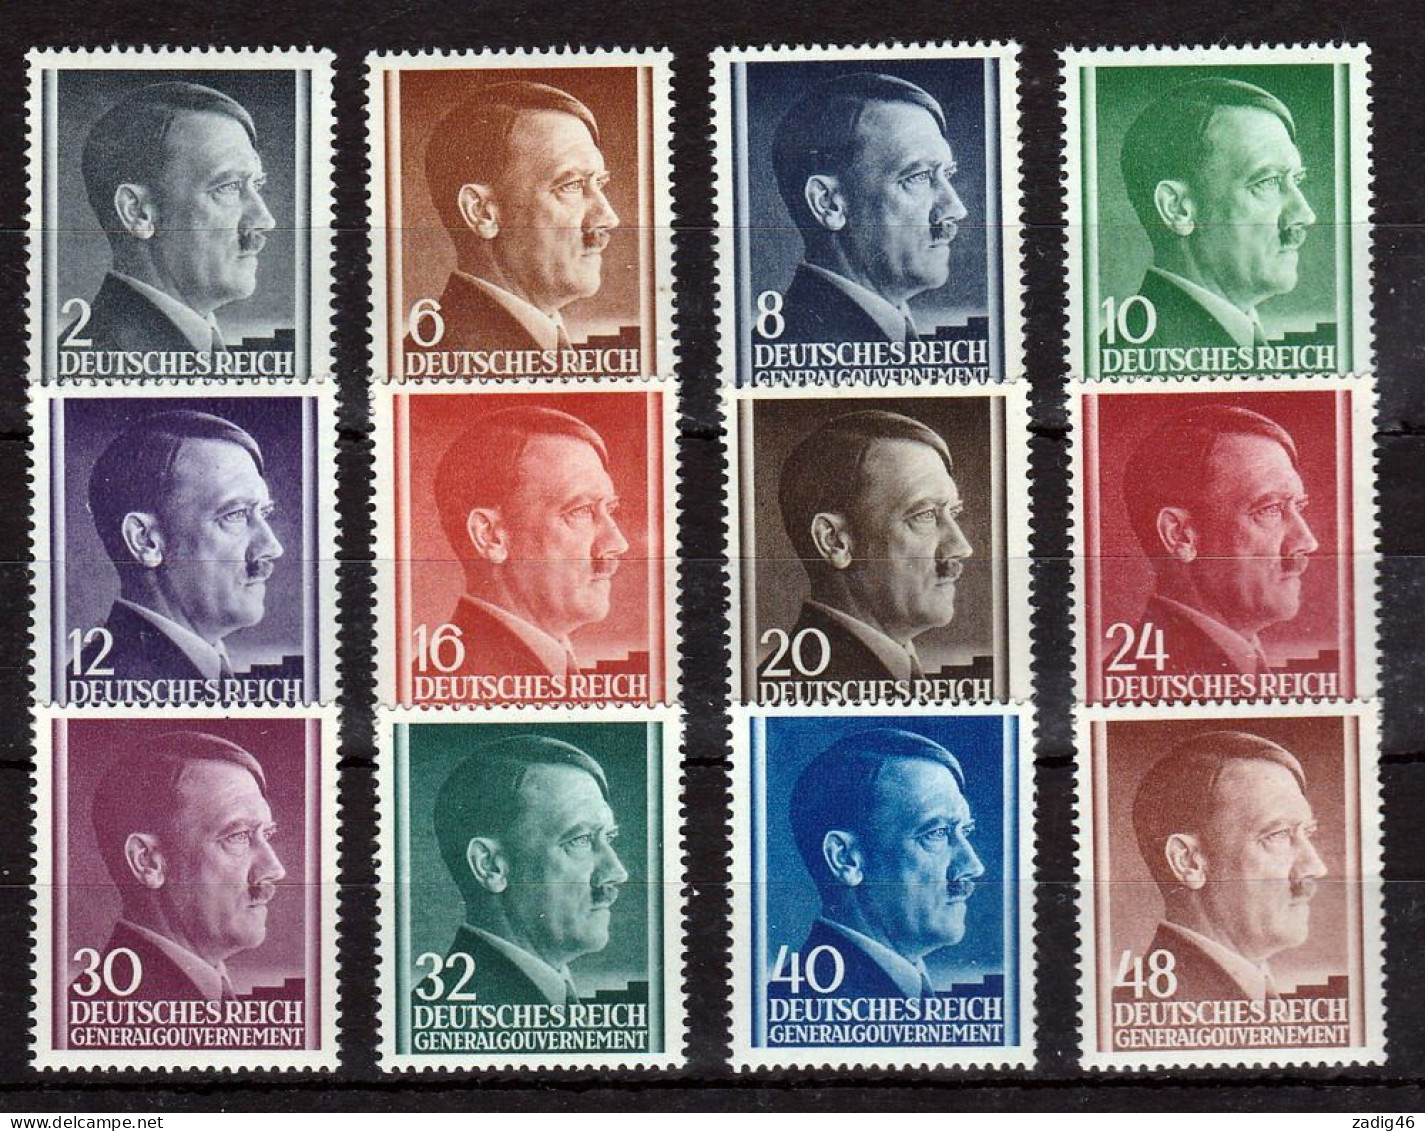 POLOGNE - GOUVERNEMENT GENERAL - TIMBRES N° 82 A 93 NEUFS SANS CHARNIERES ** - General Government